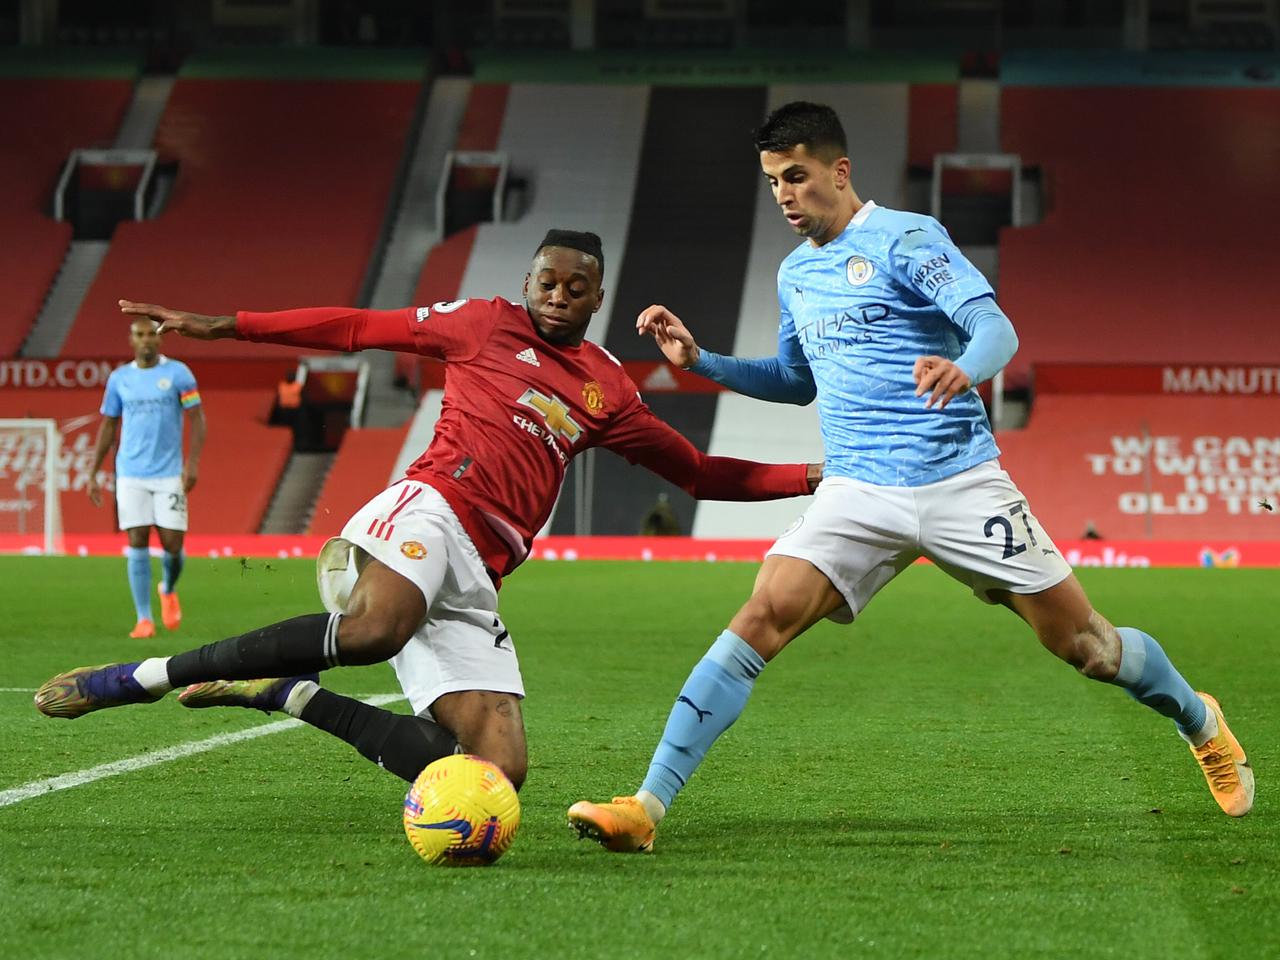 Match Report: Man United 0 Manchester City 0 | Manchester United